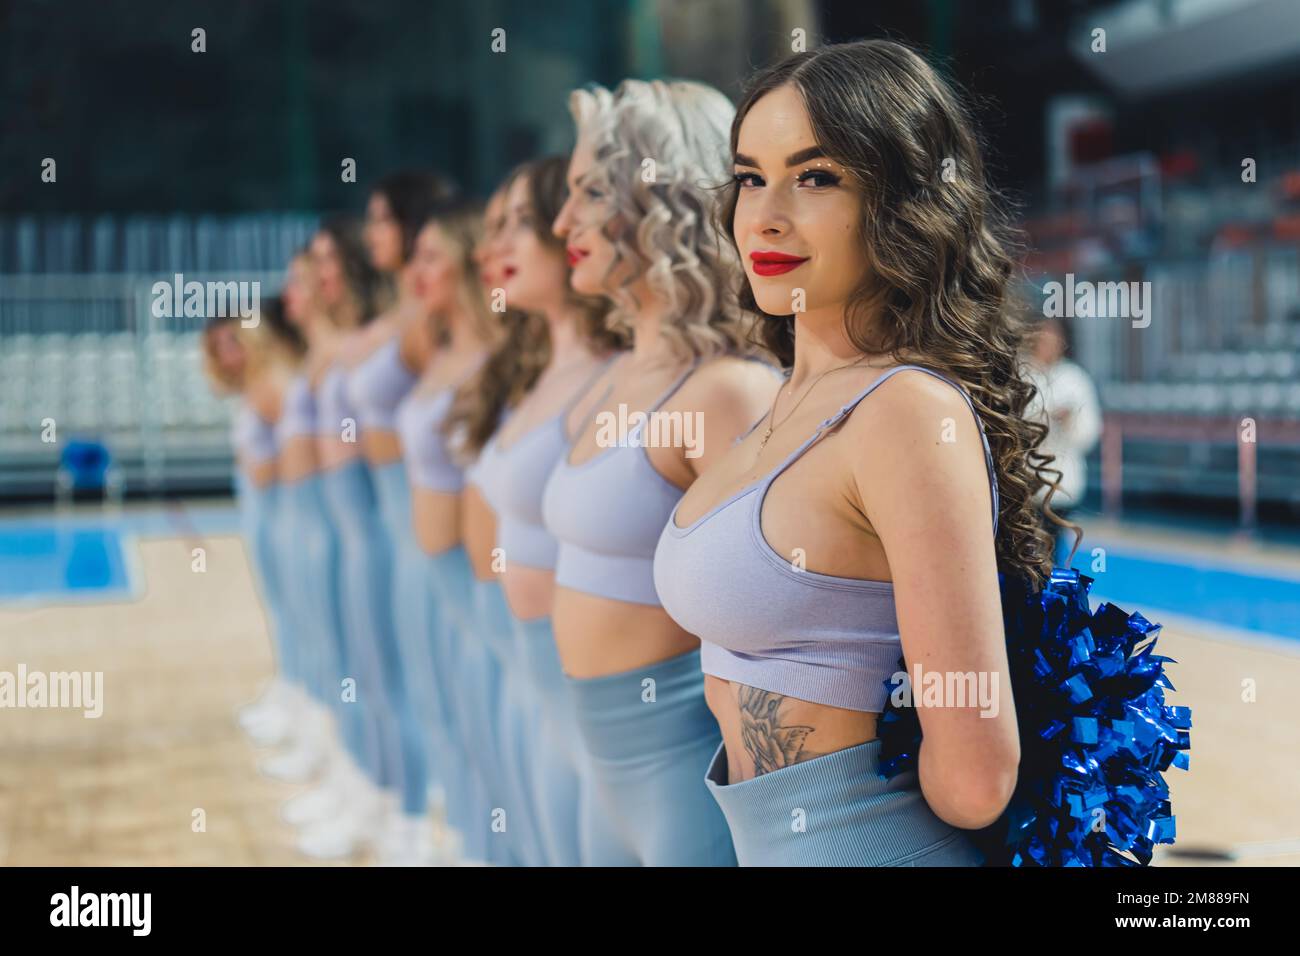 A cheerleader stands confidently in a row with her fellows. Blue pom-poms are held in their hands. The cheerleader's warm smile radiate positivity. Perfectly capturing the spirit of cheerleading. Stock Photo